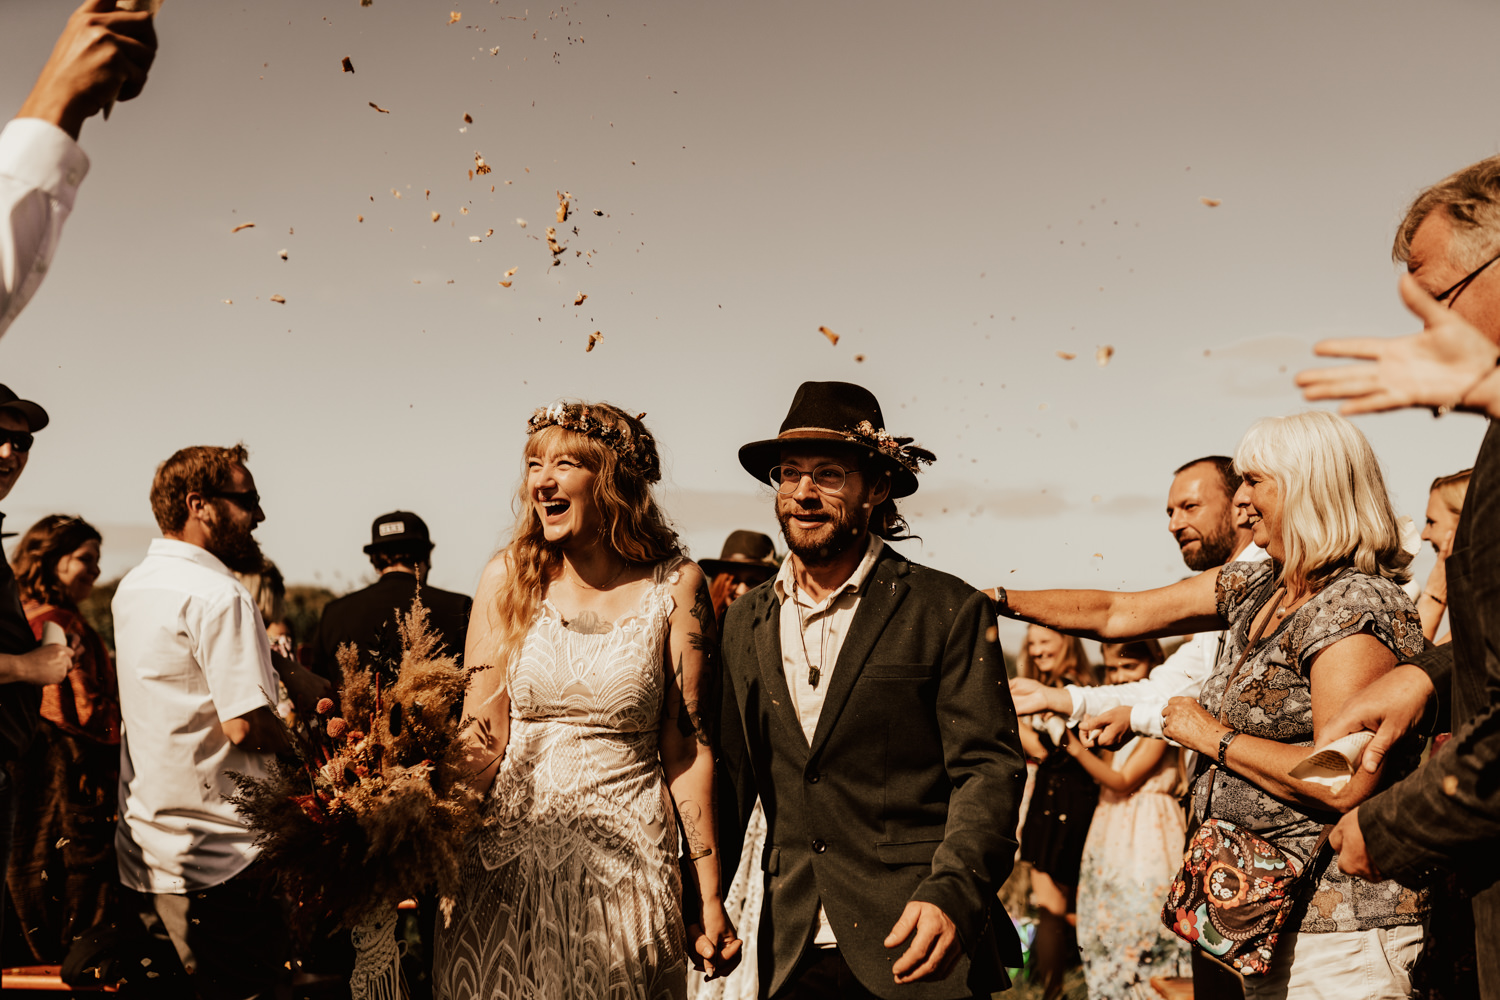 Bohemian wedding couple walking down the aisle during their outdoor festival wedding in Germany